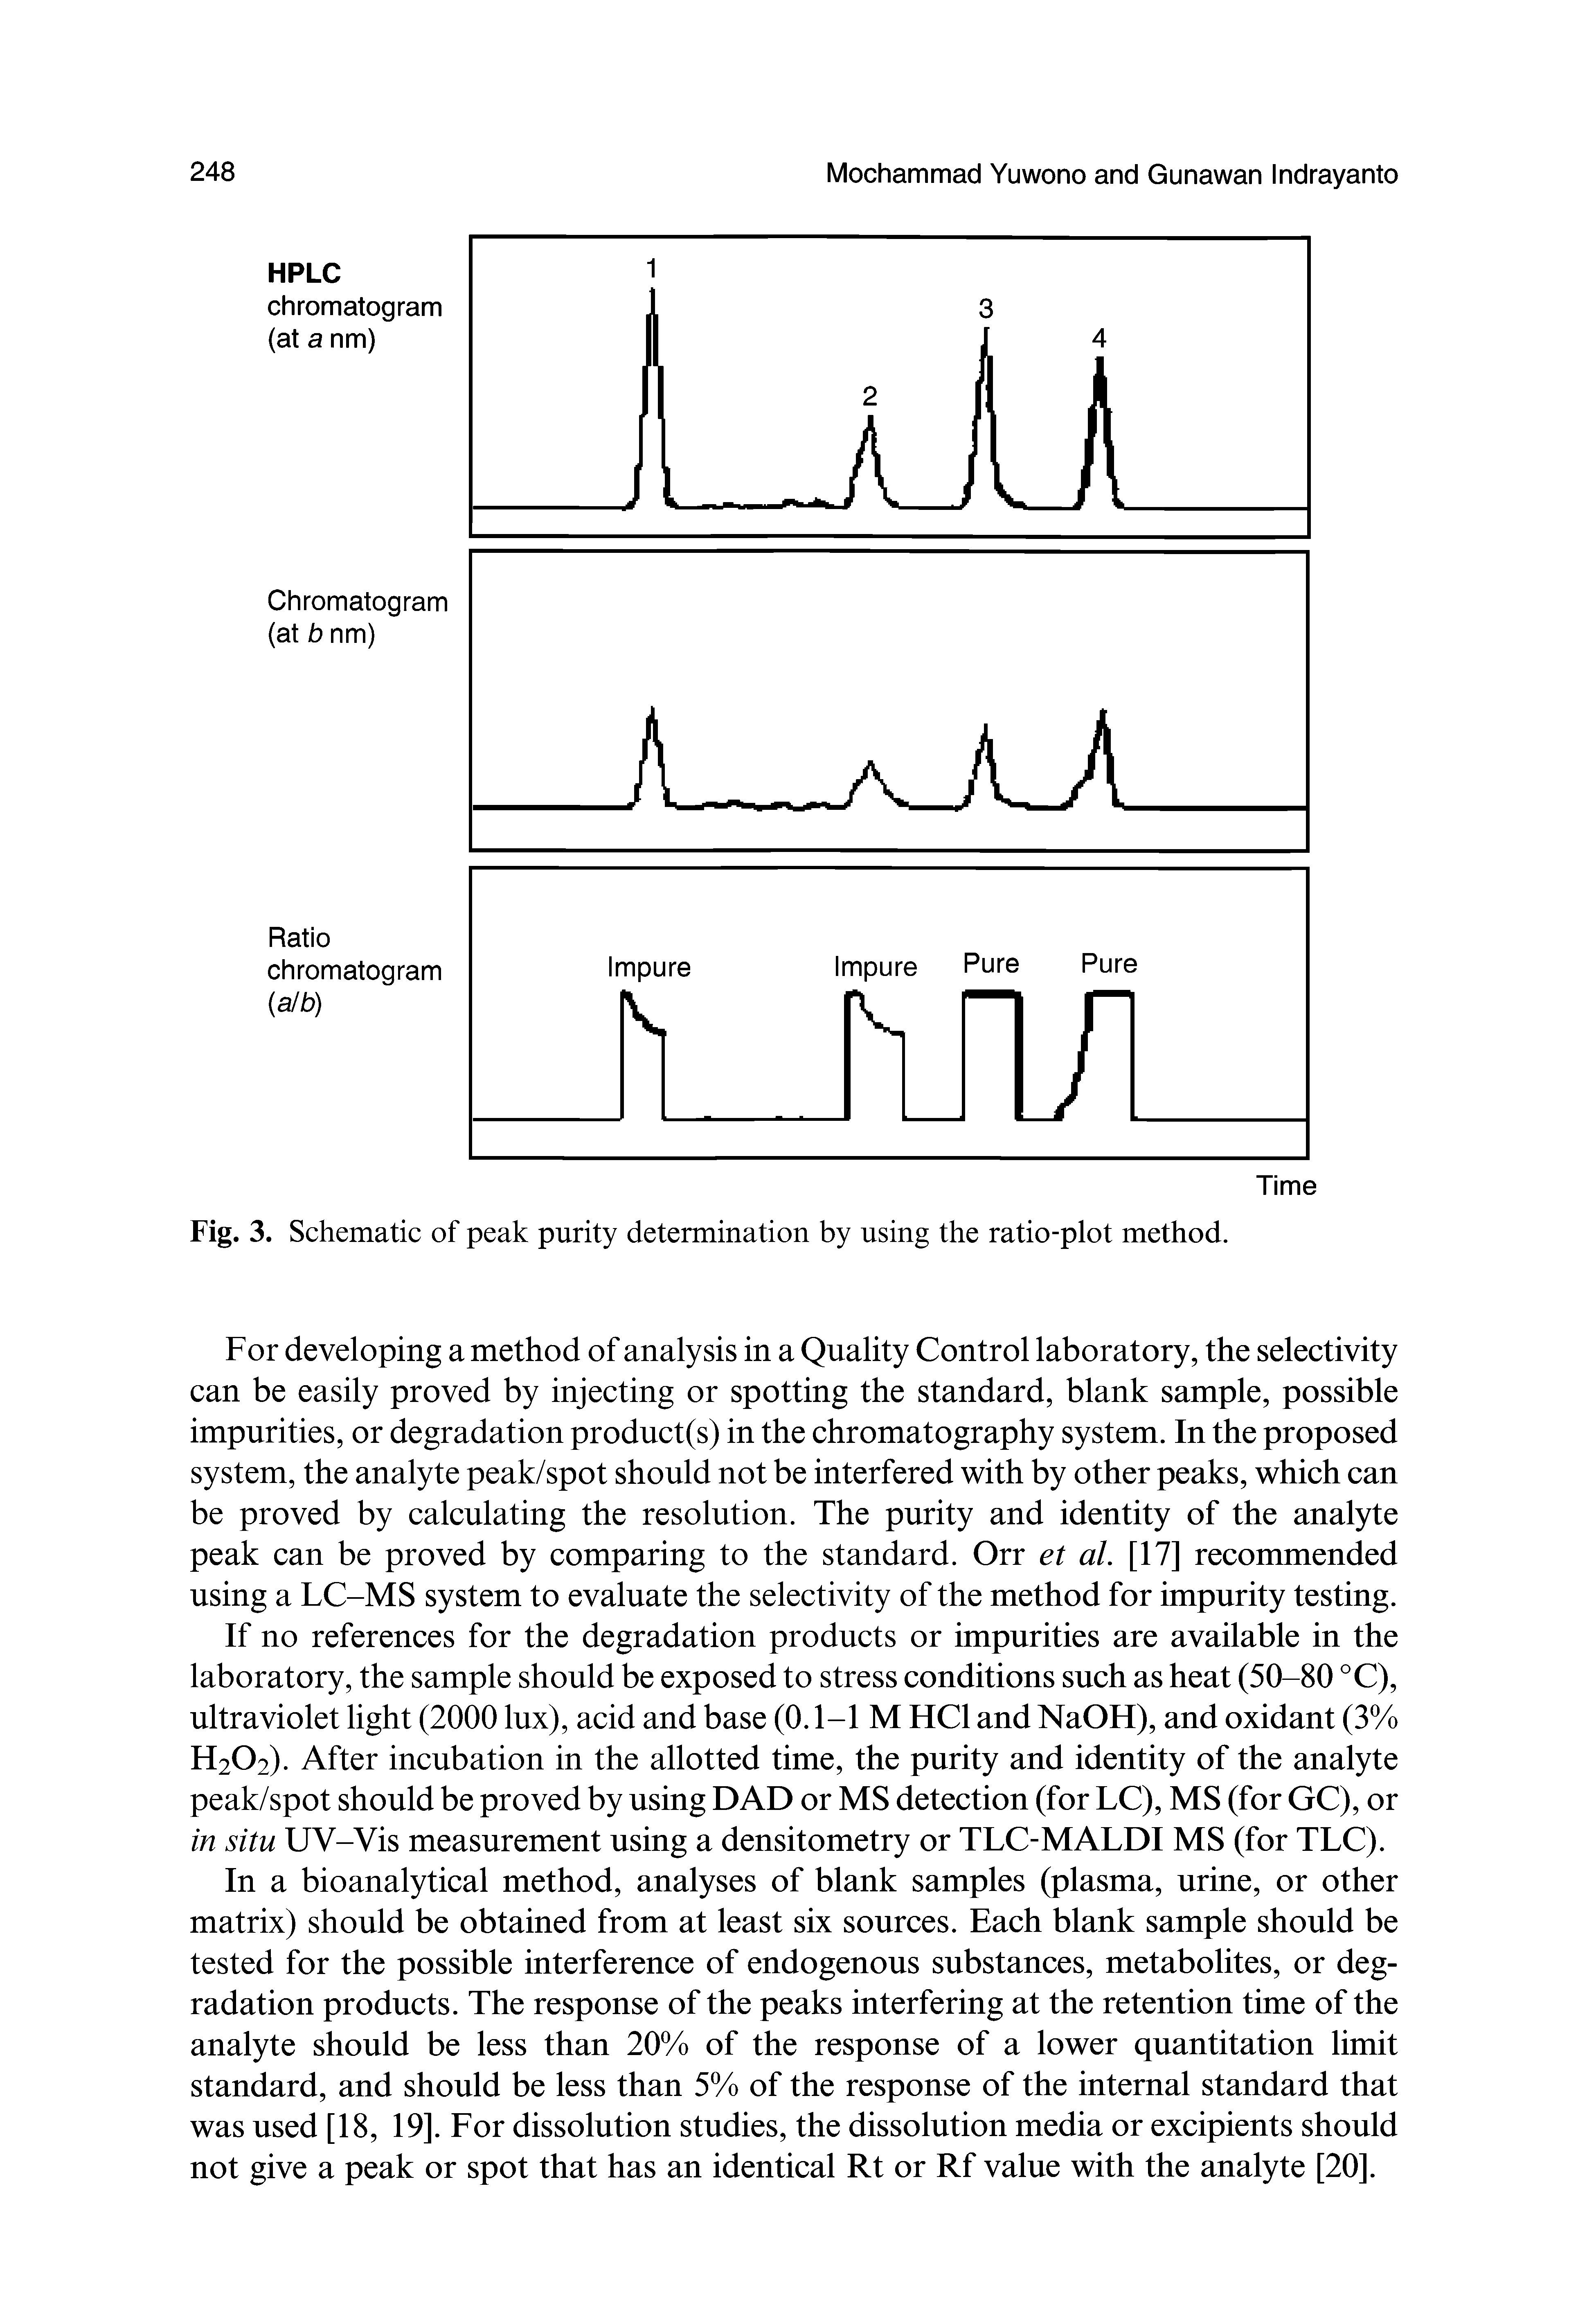 Fig. 3. Schematic of peak purity determination by using the ratio-plot method.